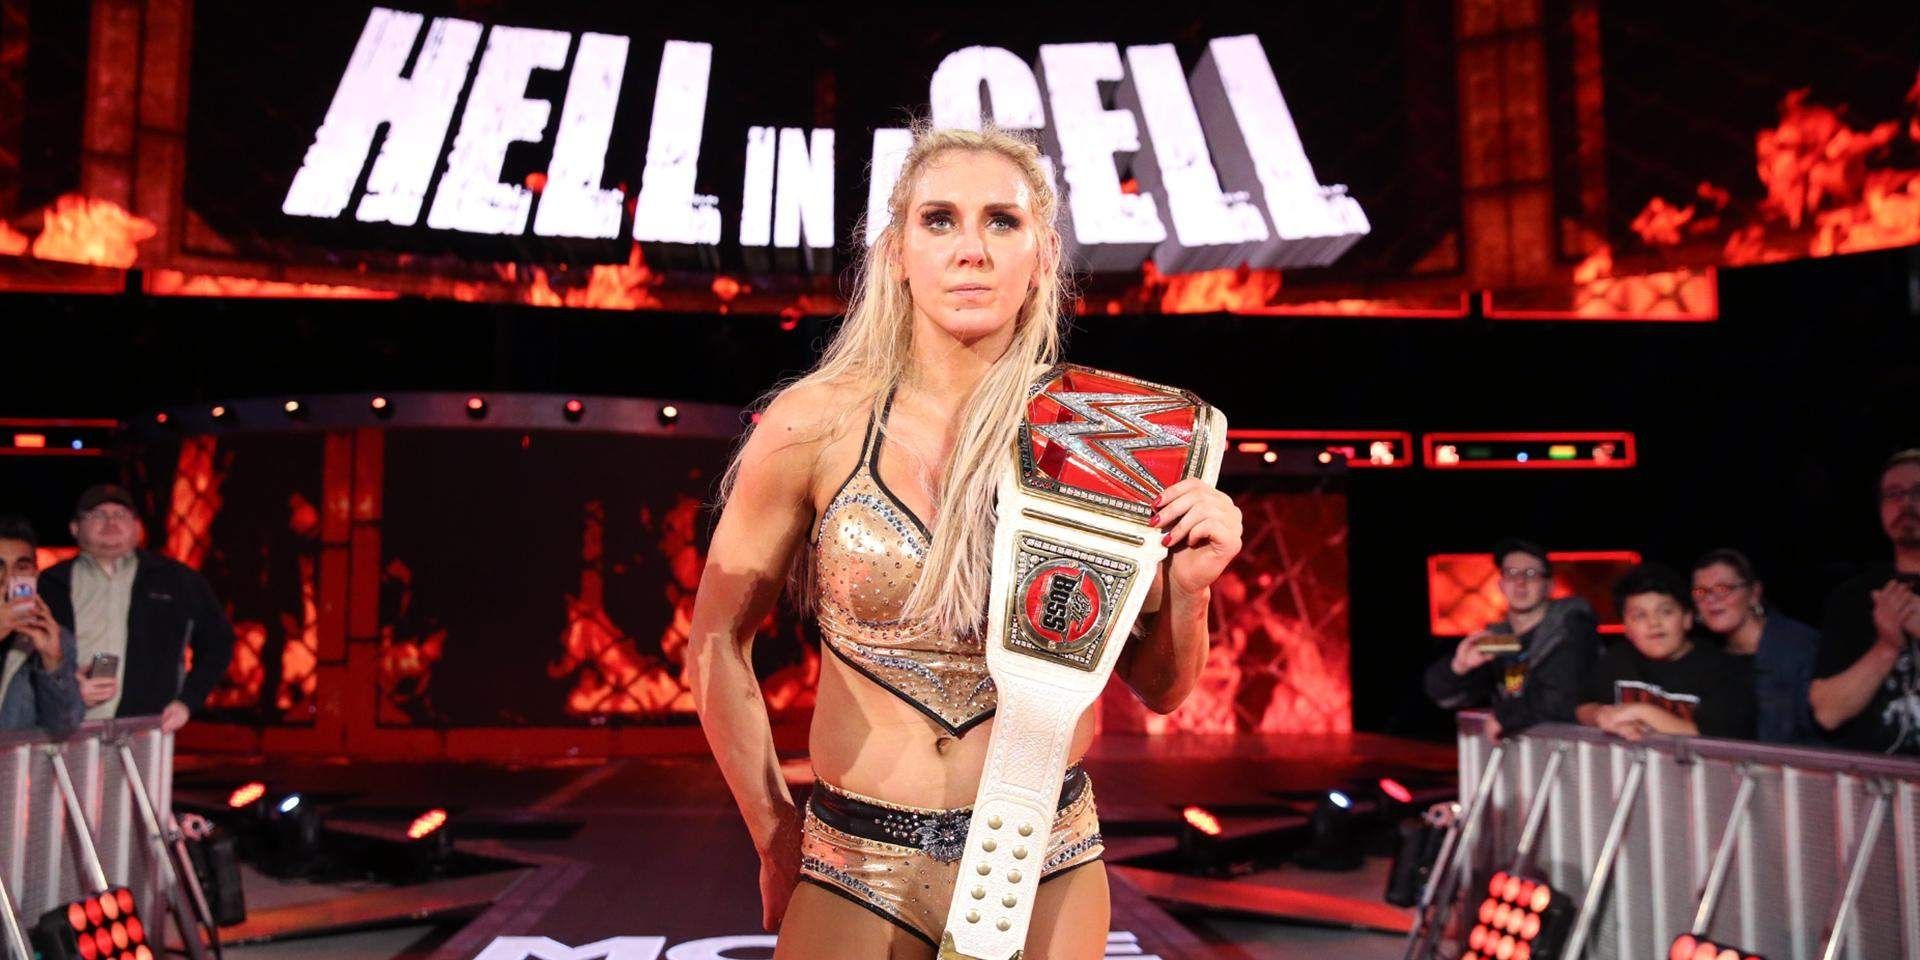 Charlotte Flair is one of the best Women's Champions in WWE history